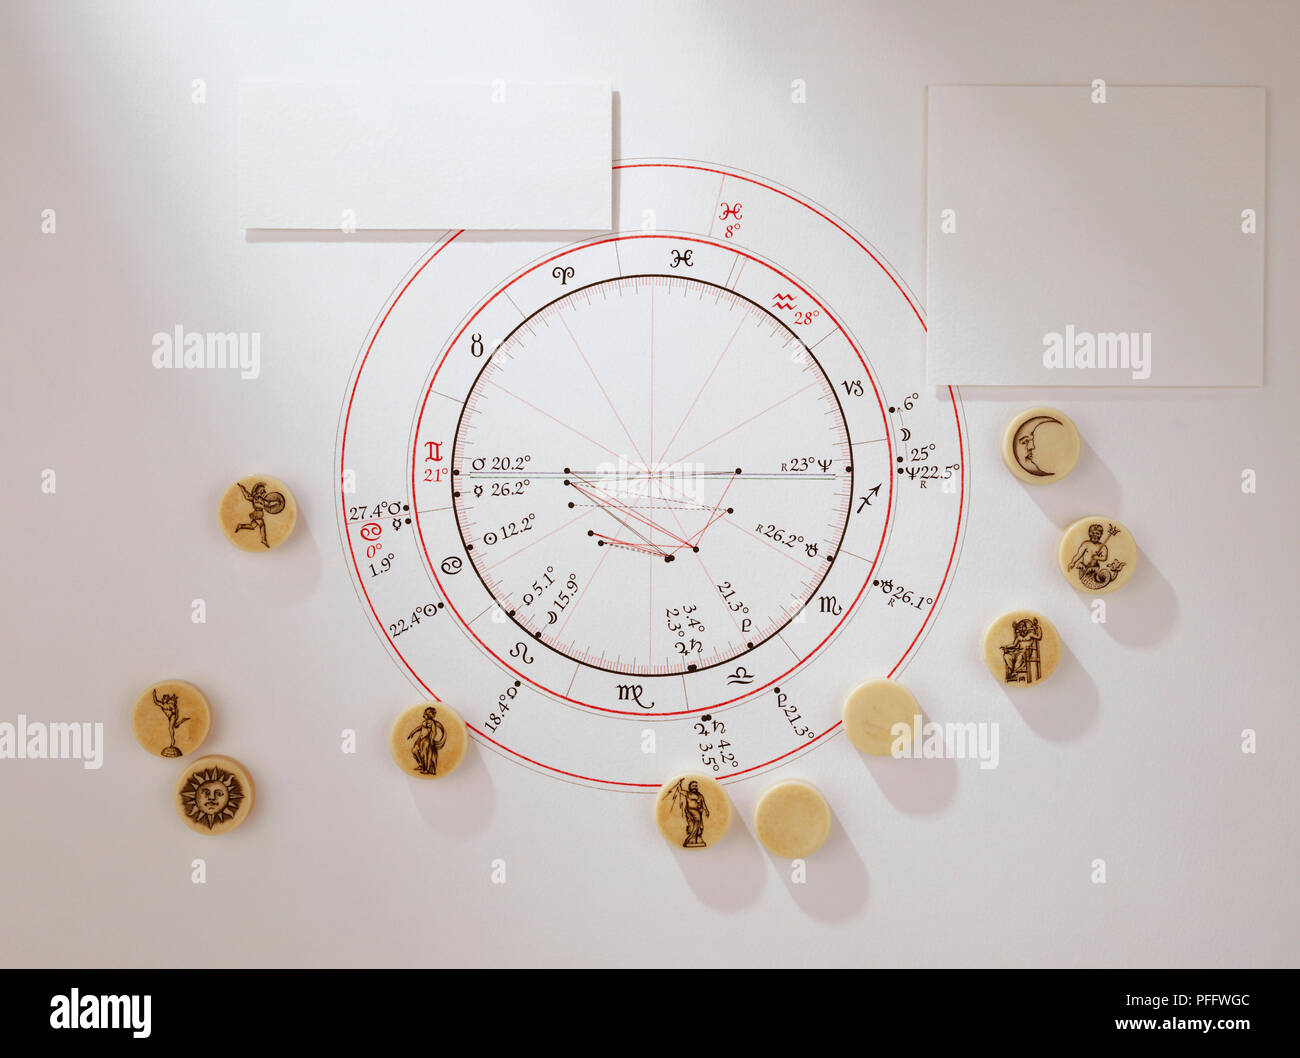 An astrological chart surrounded by ivory discs showing signs of the zodiac Stock Photo